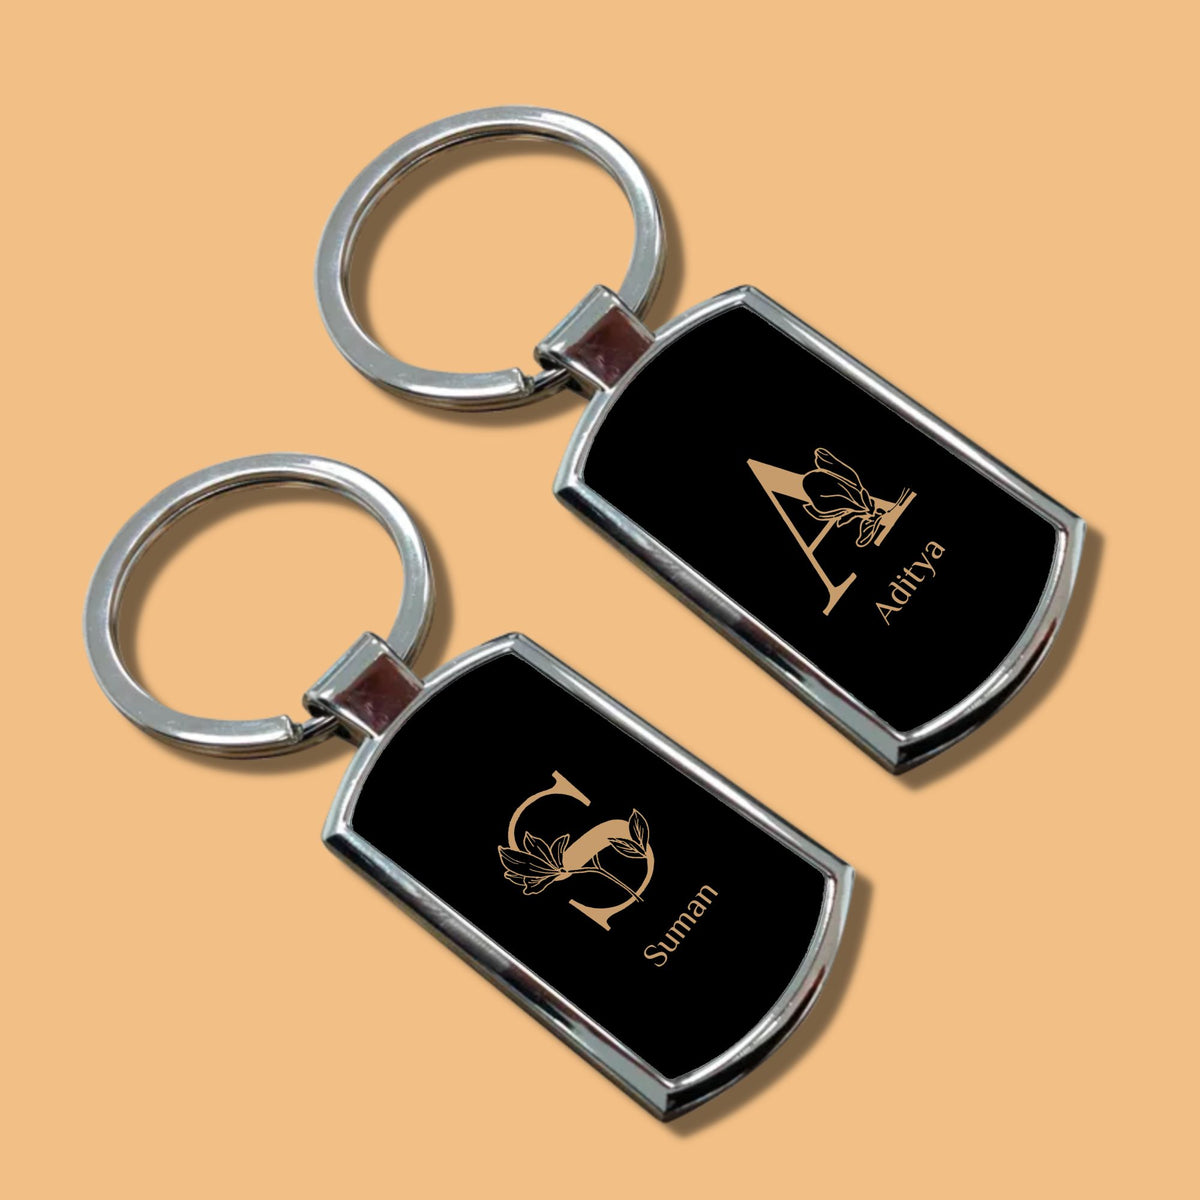 Personalized-metal-keychain-for-couple-with-custom-name-message-initial-photo-gogirgit-black